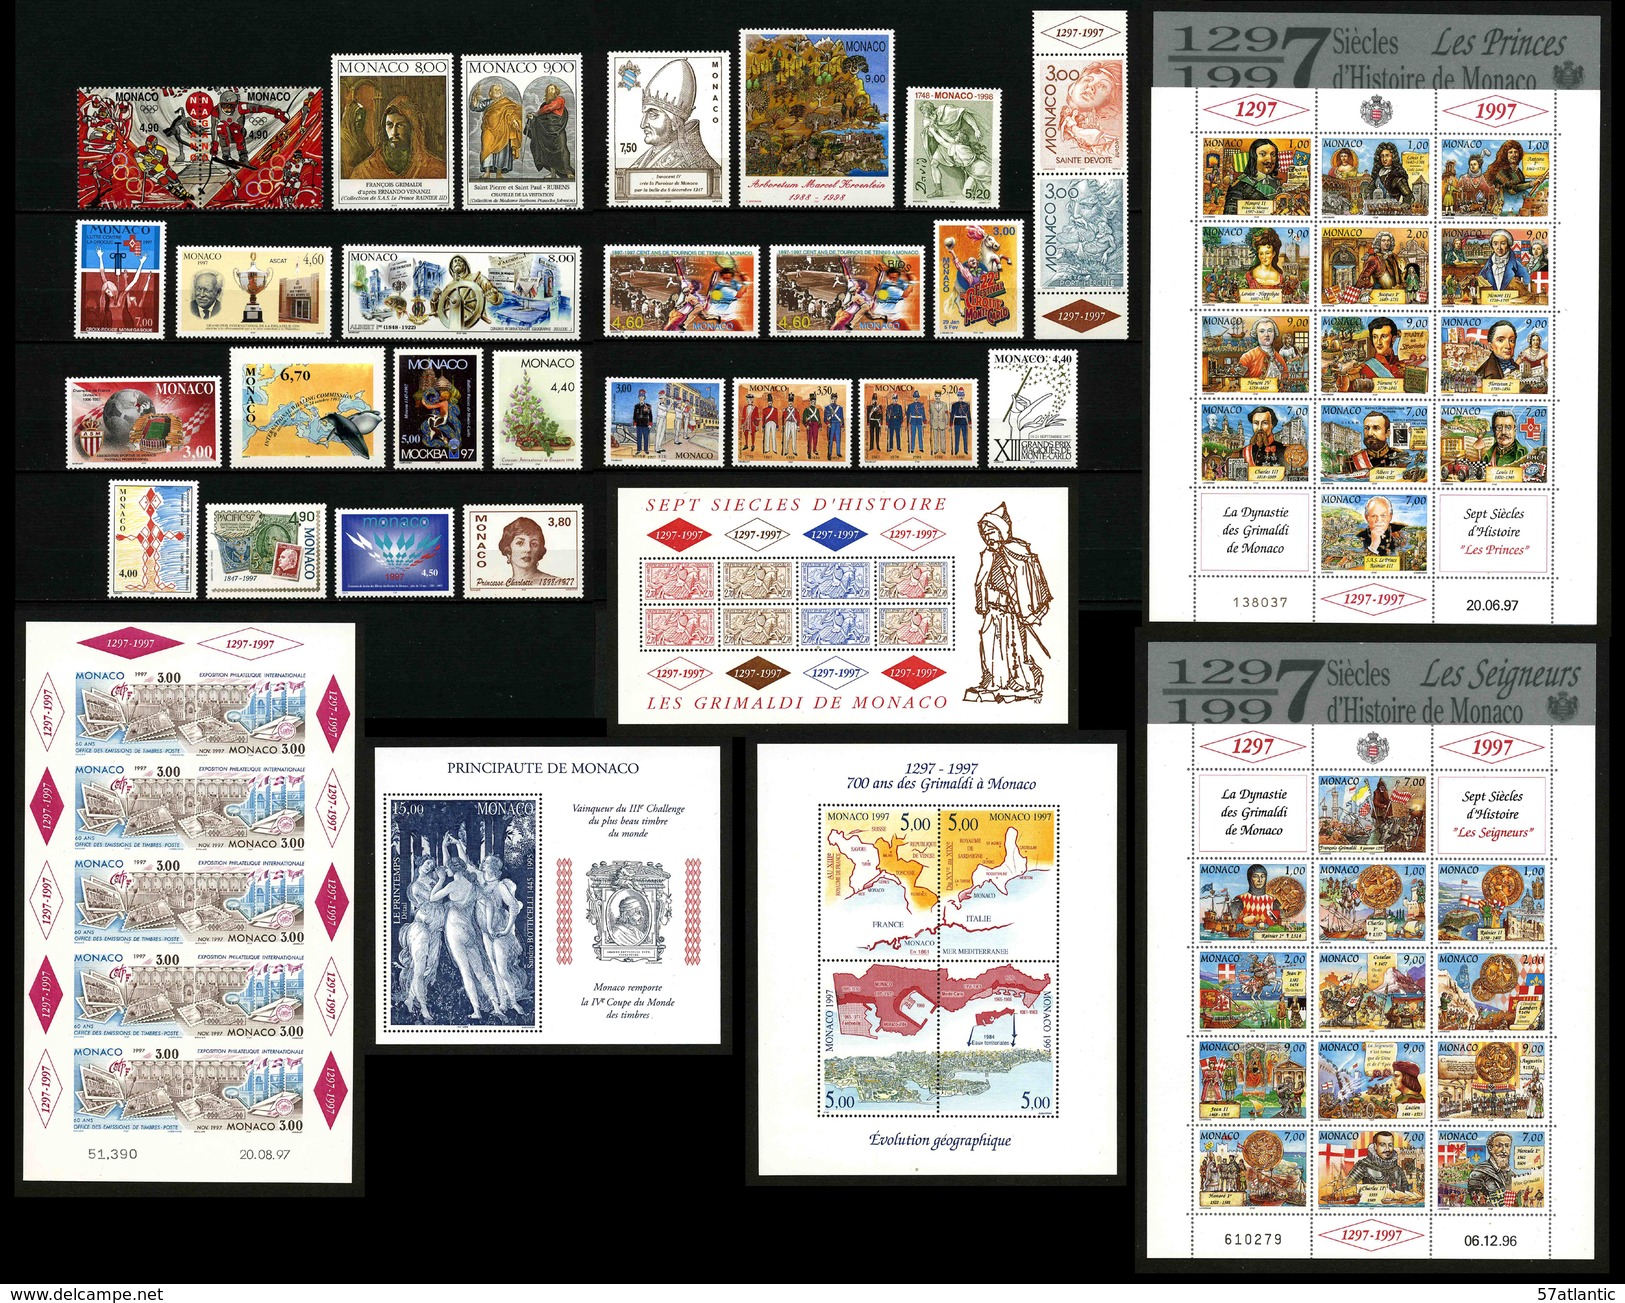 MONACO - ANNEE COMPLETE 1997 - AVEC BLOCS - 53 TIMBRES NEUFS ** + 4 BLOCS NEUFS ** - Full Years